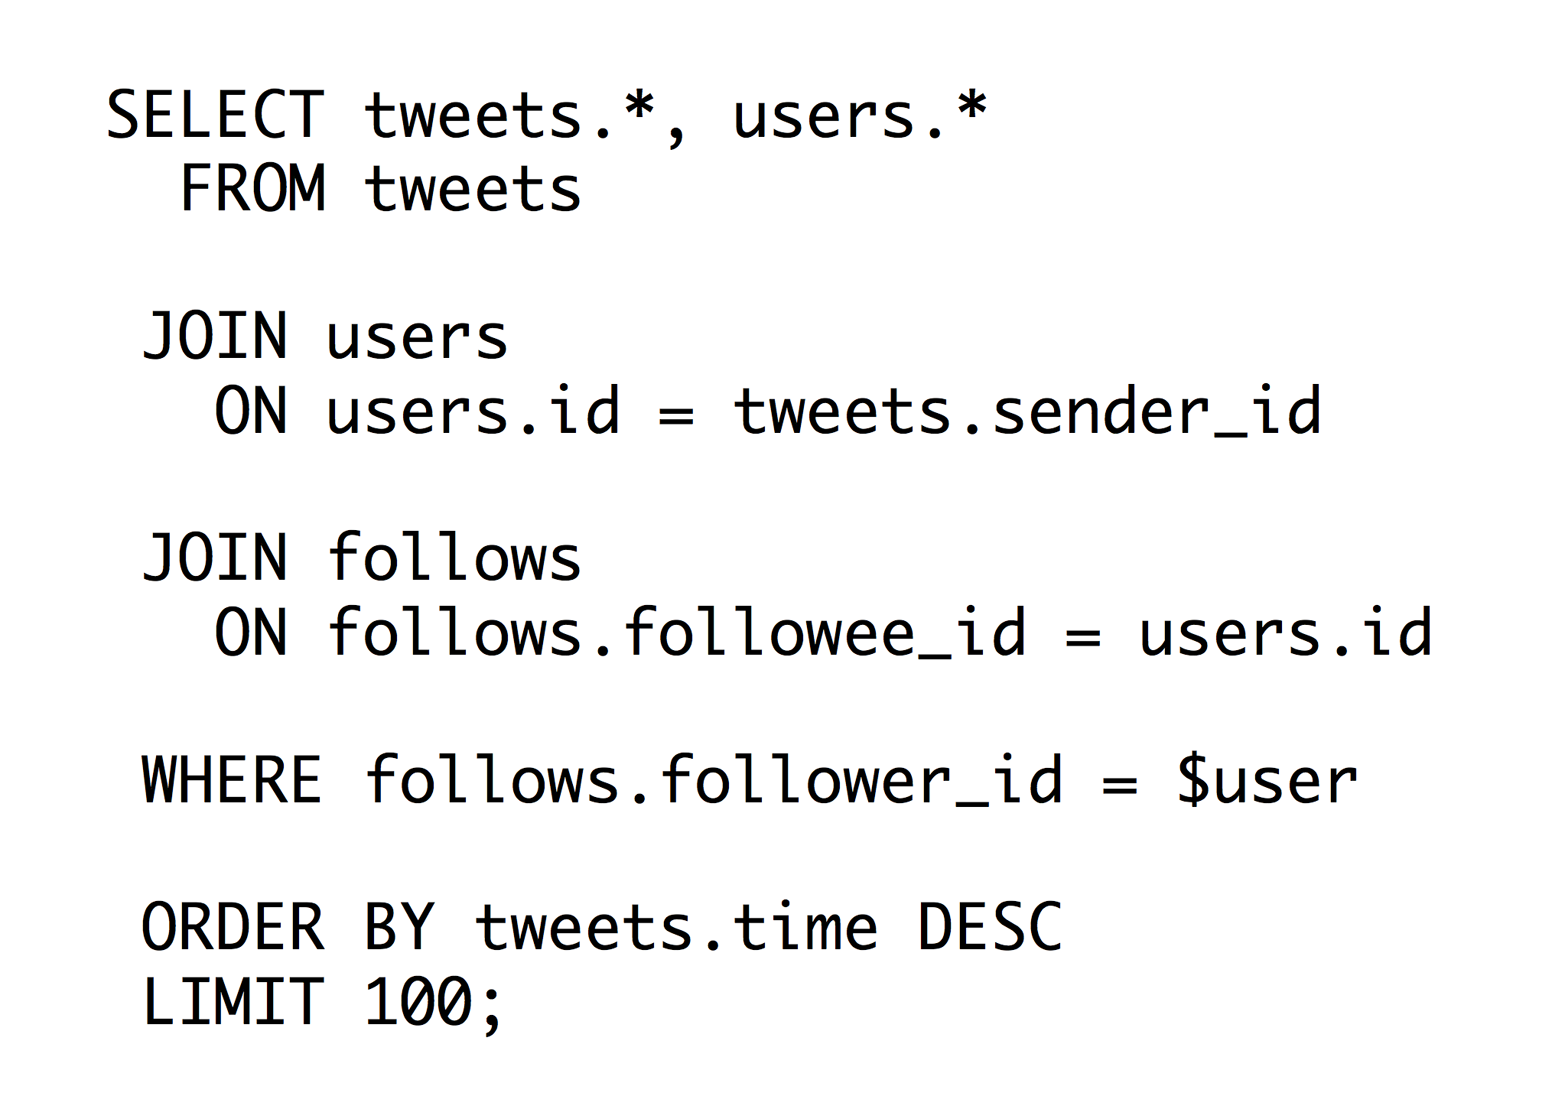 Generating a timeline of tweets by using SQL.